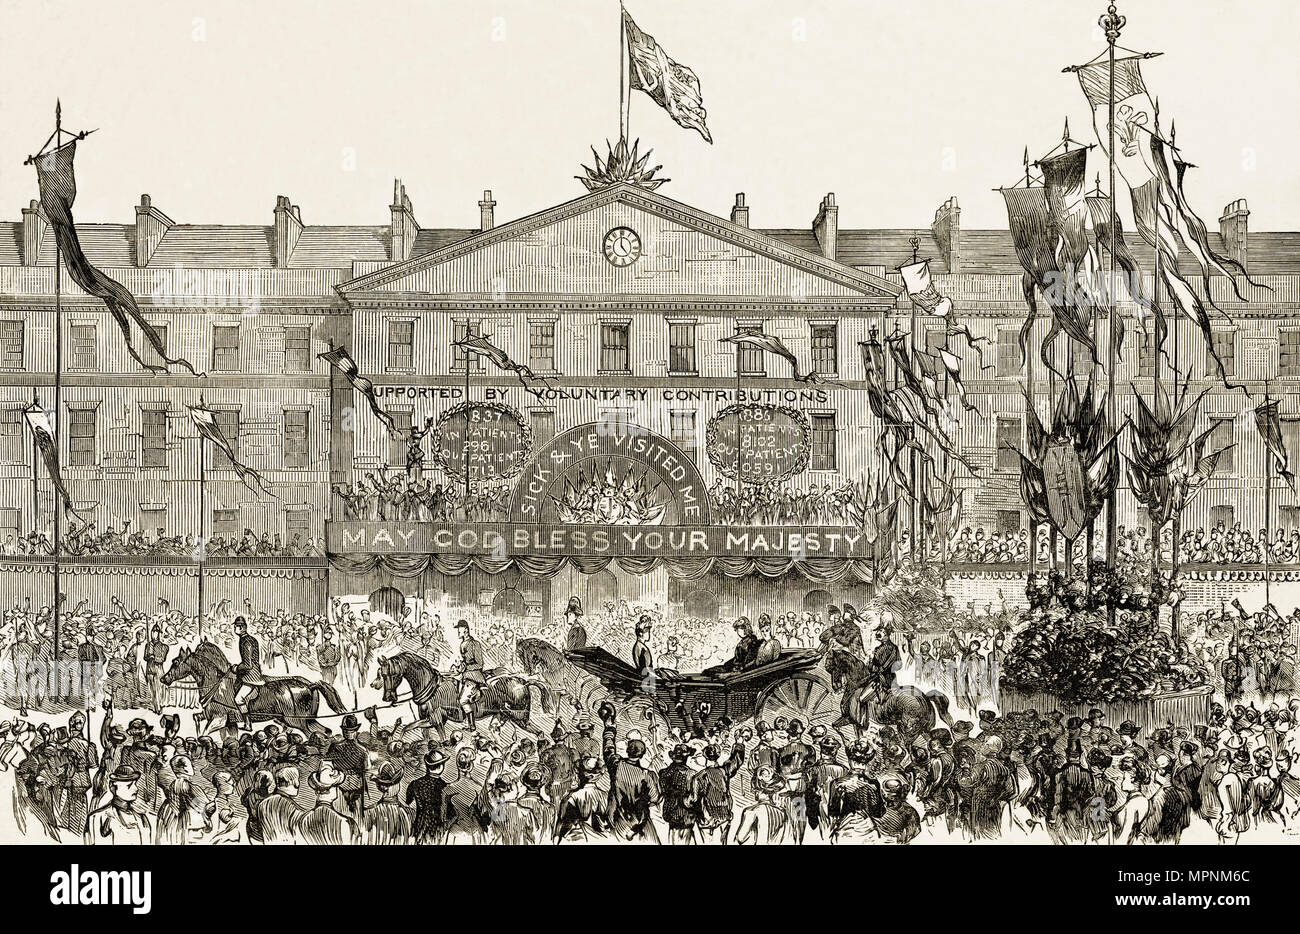 Queen Victoria royal procession passing The London Hospital Whitechapel East London England UK 14th May 1887 with bunting & crowds cheering. 19th century Victorian engraving circa 1887 Stock Photo